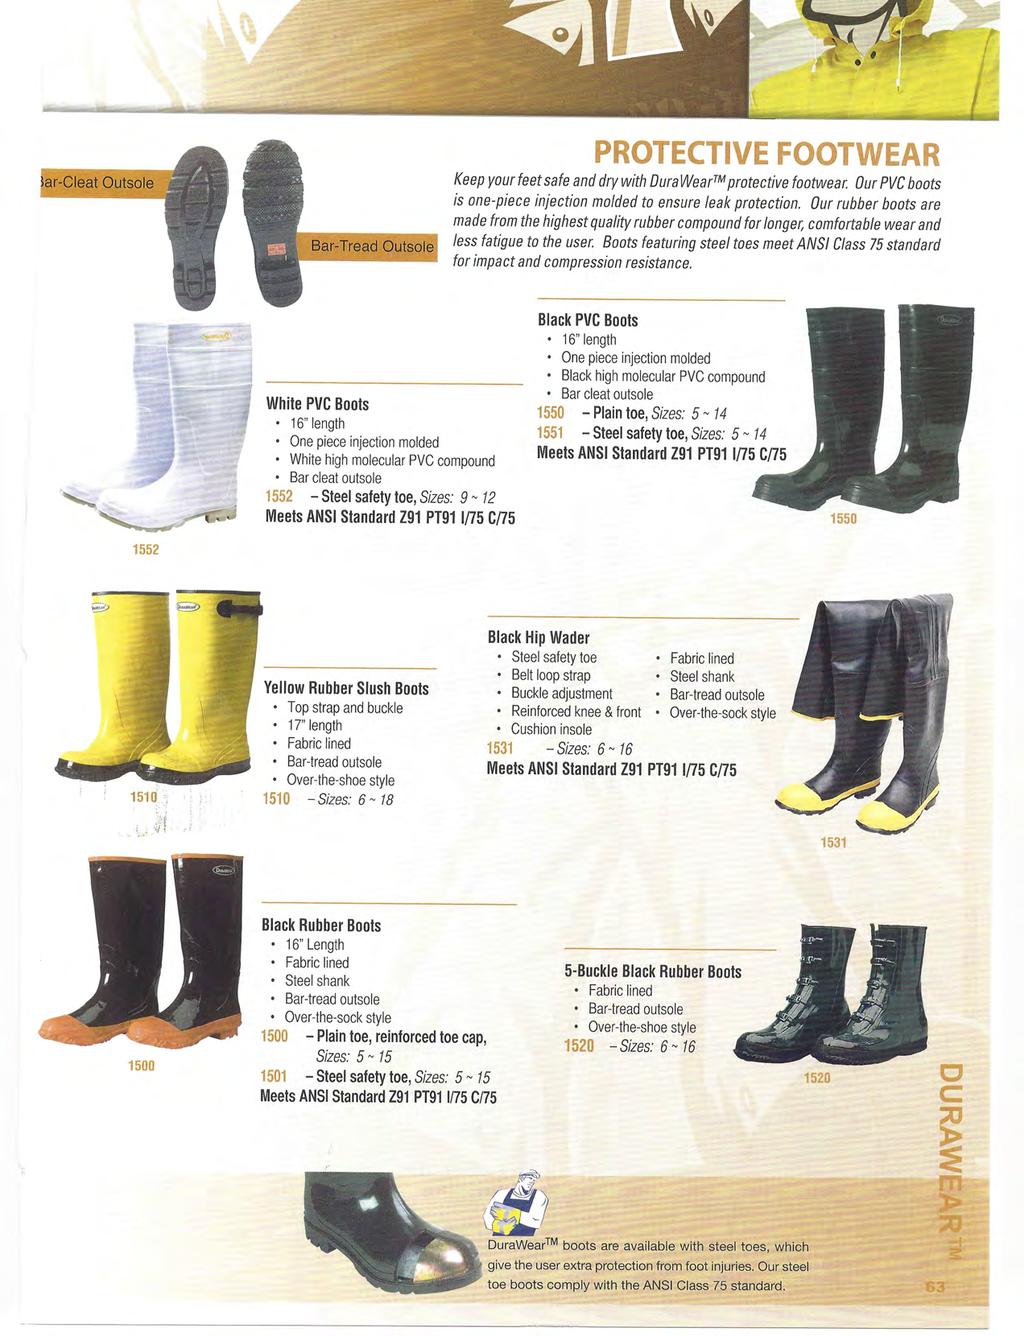 ar-cleat Outsole PROTECTIVE FOOTWEAR Keep your feet safe and dry with Dura Wear protective footwear. Our PVC boots is one-piece injection molded to ensure leak protection.